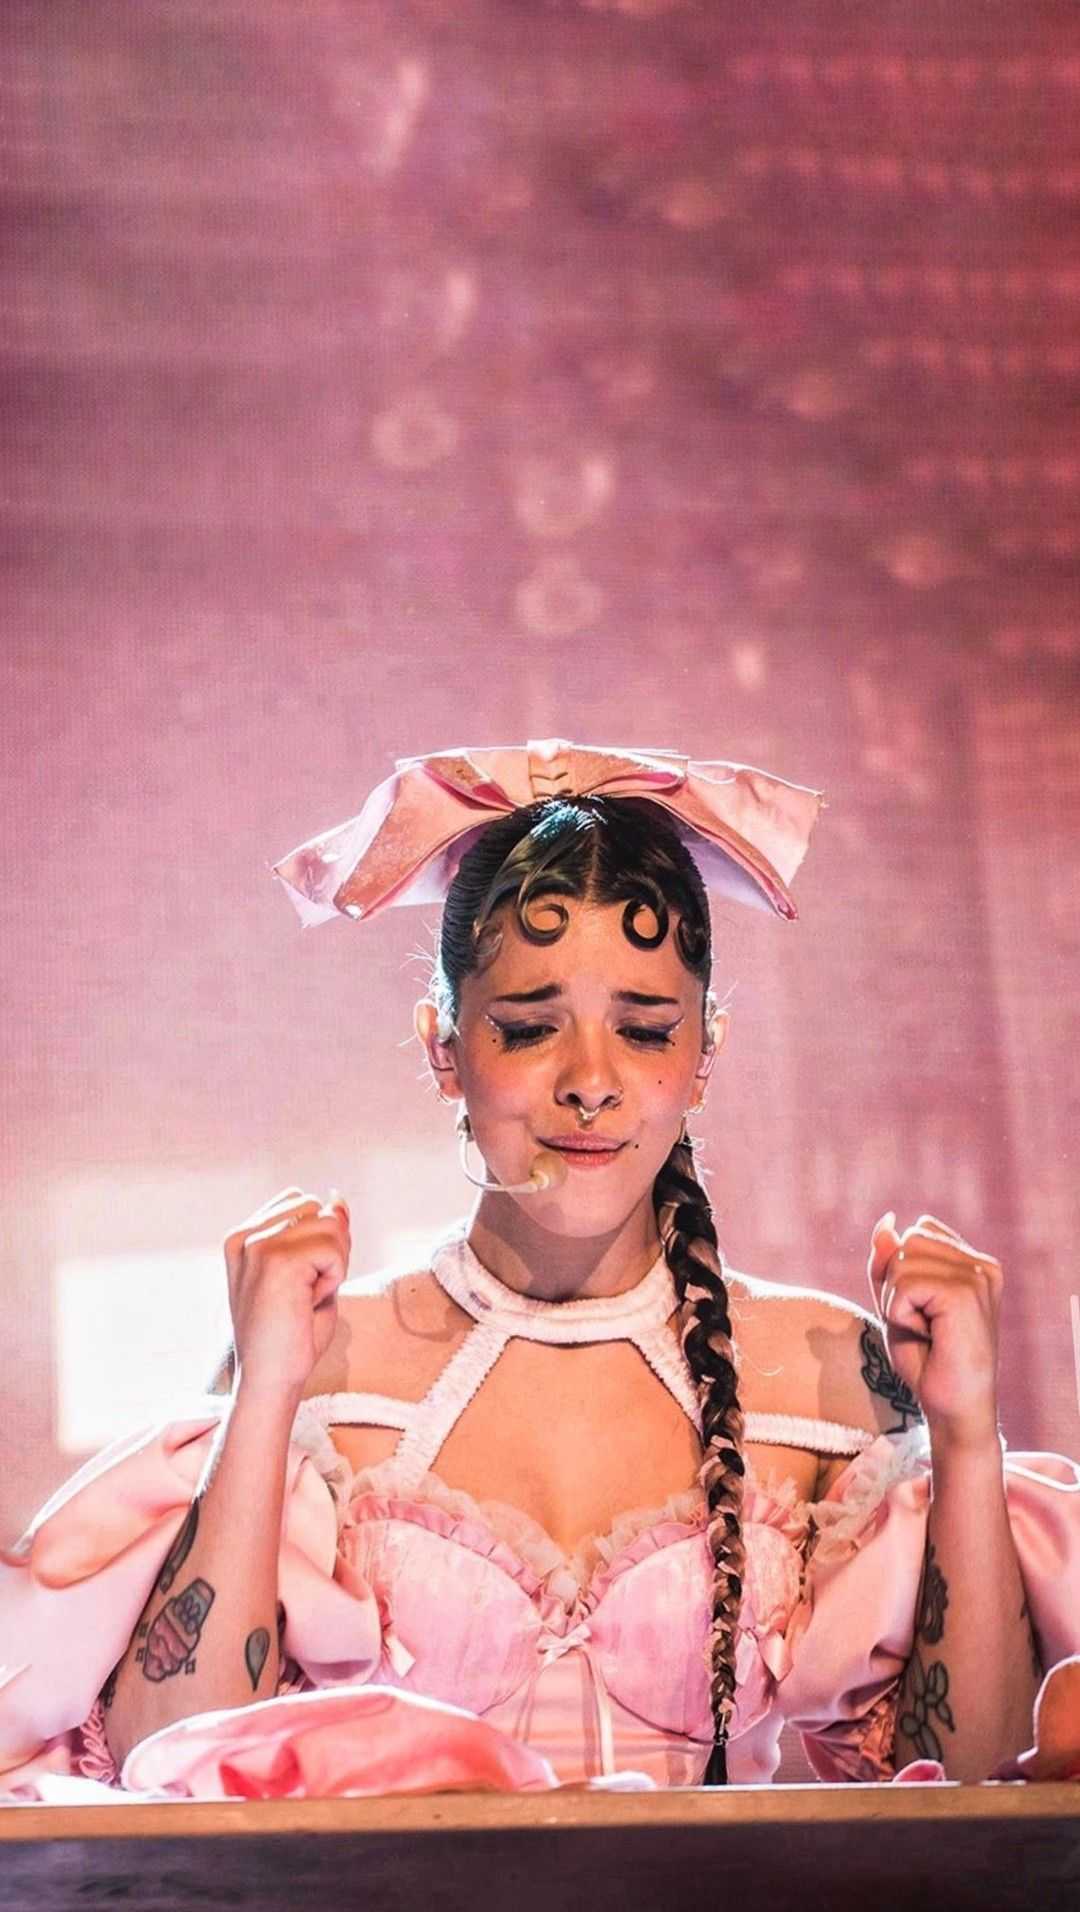 1920x2880 2018 The sweetest and most adorable pictures of Ariana Grande! - Melanie Martinez